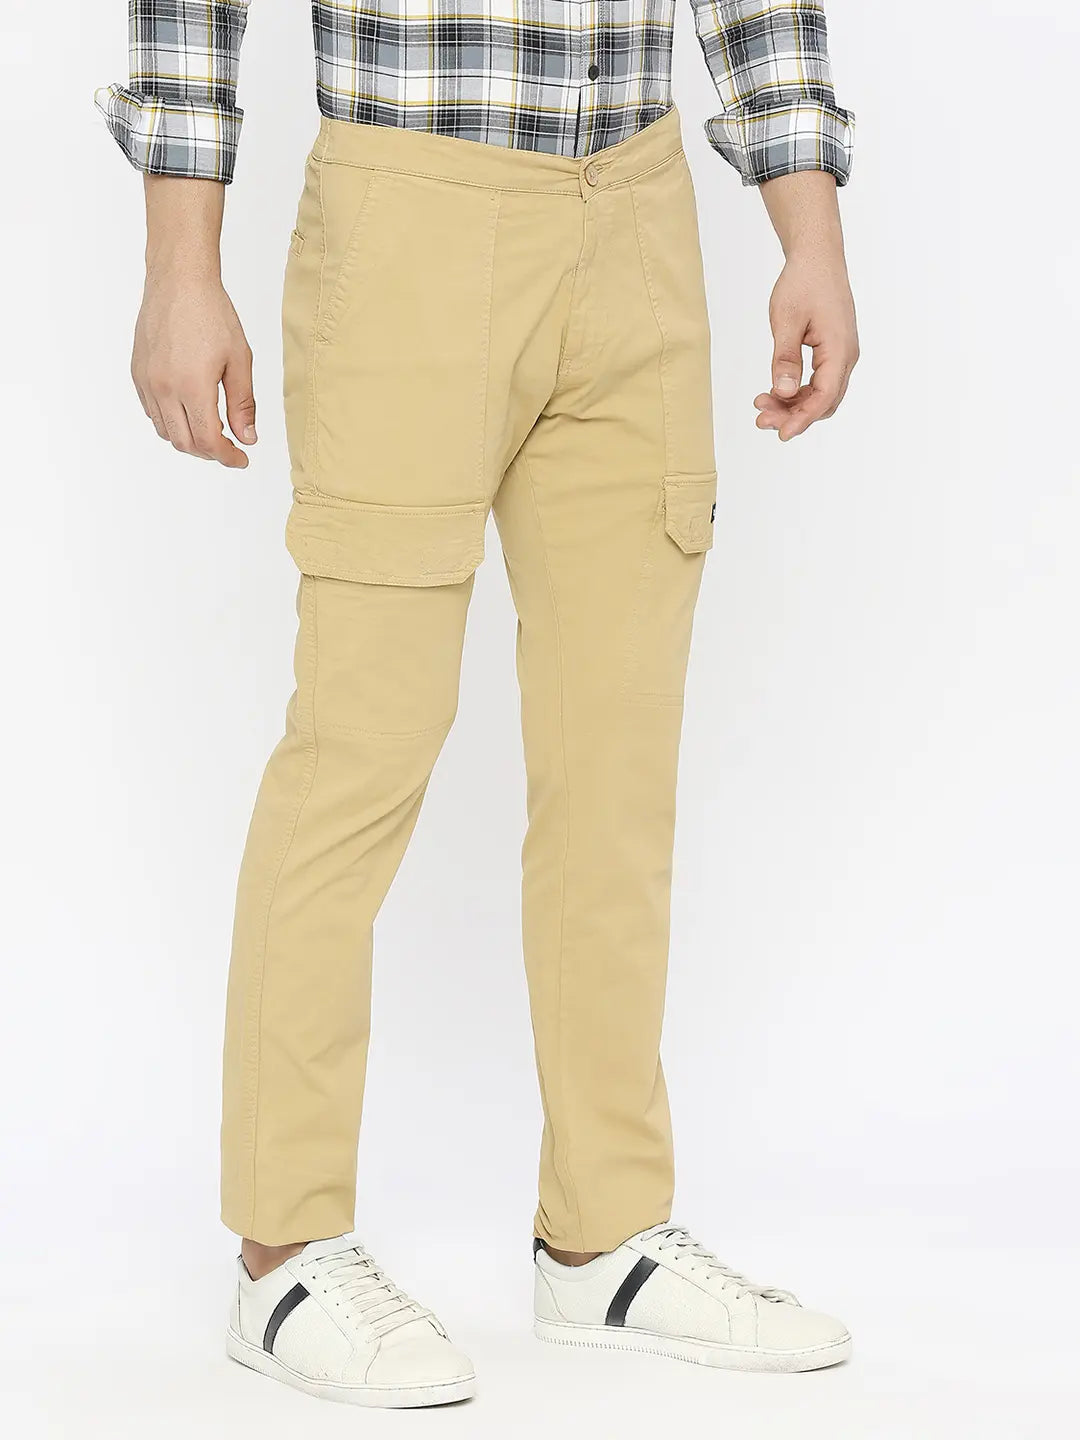 Buy Spykar Brown Cotton Blend Mid Rise Trousers for Men Size  28VOT02BBCG031Mud Brown at Amazonin